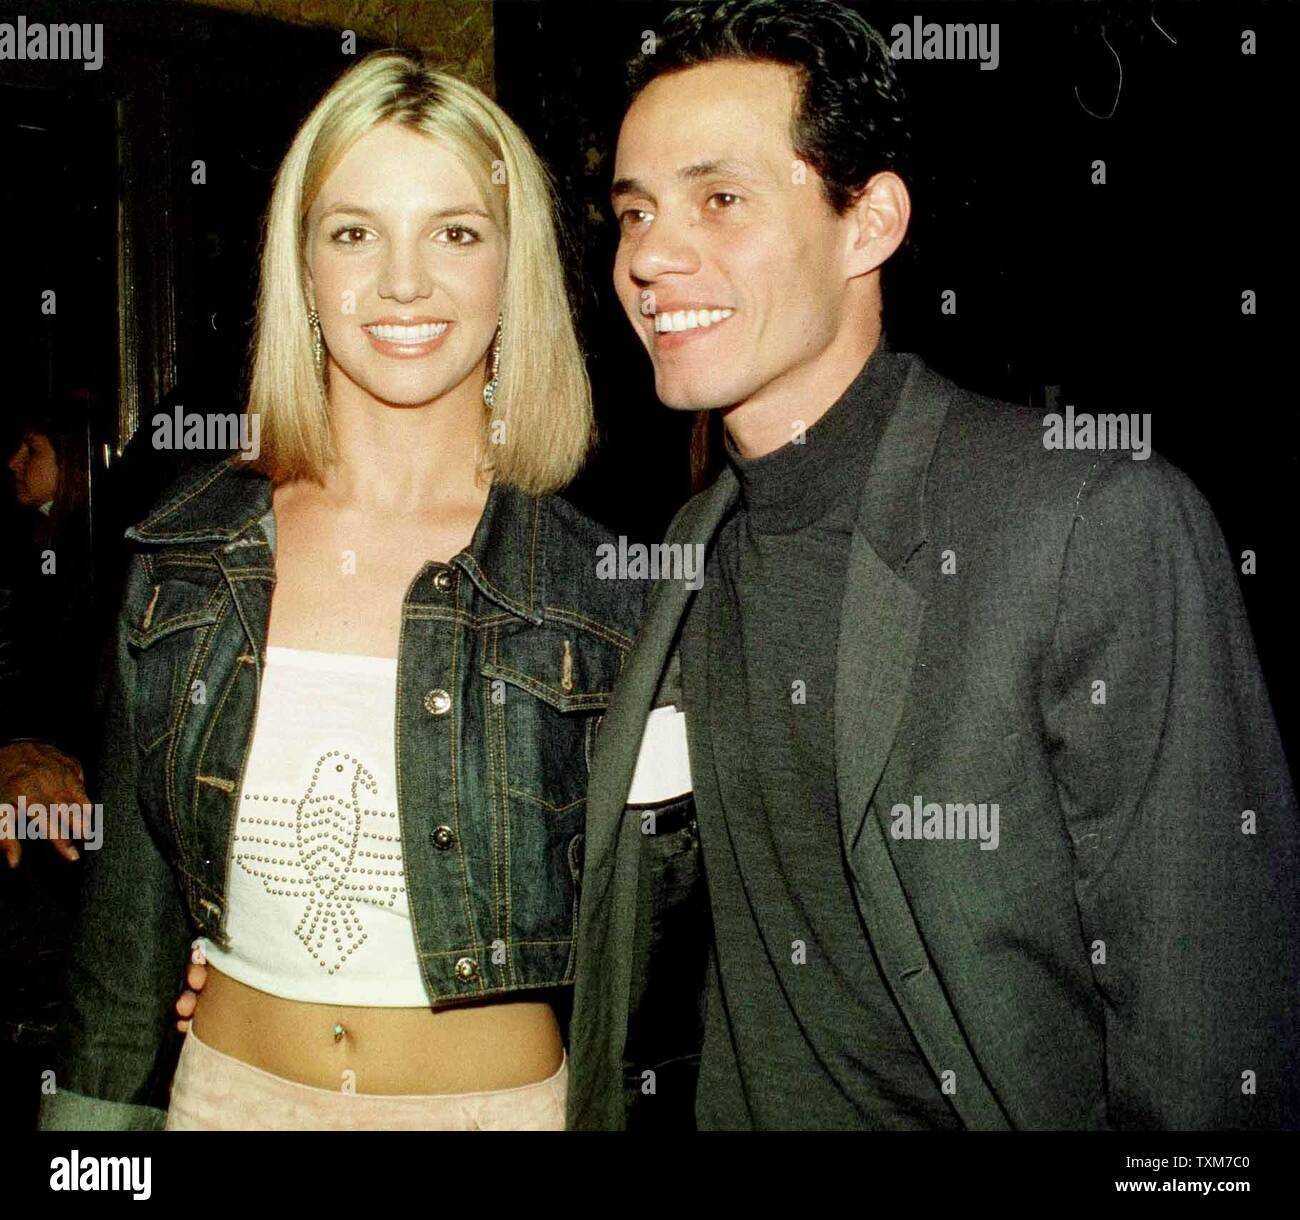 NYP2000010401- 04 JANUARY 2000 - NEW YORK, NEW YORK, USA: Grammy Award nominees Britney Spears (Best New Artist) and Marc Anthony (Best Male Pop Artist) pose, January 4 , after the Grammy Awards announcements in New York.  rg/ep/Ezio Petersen  UPI Stock Photo